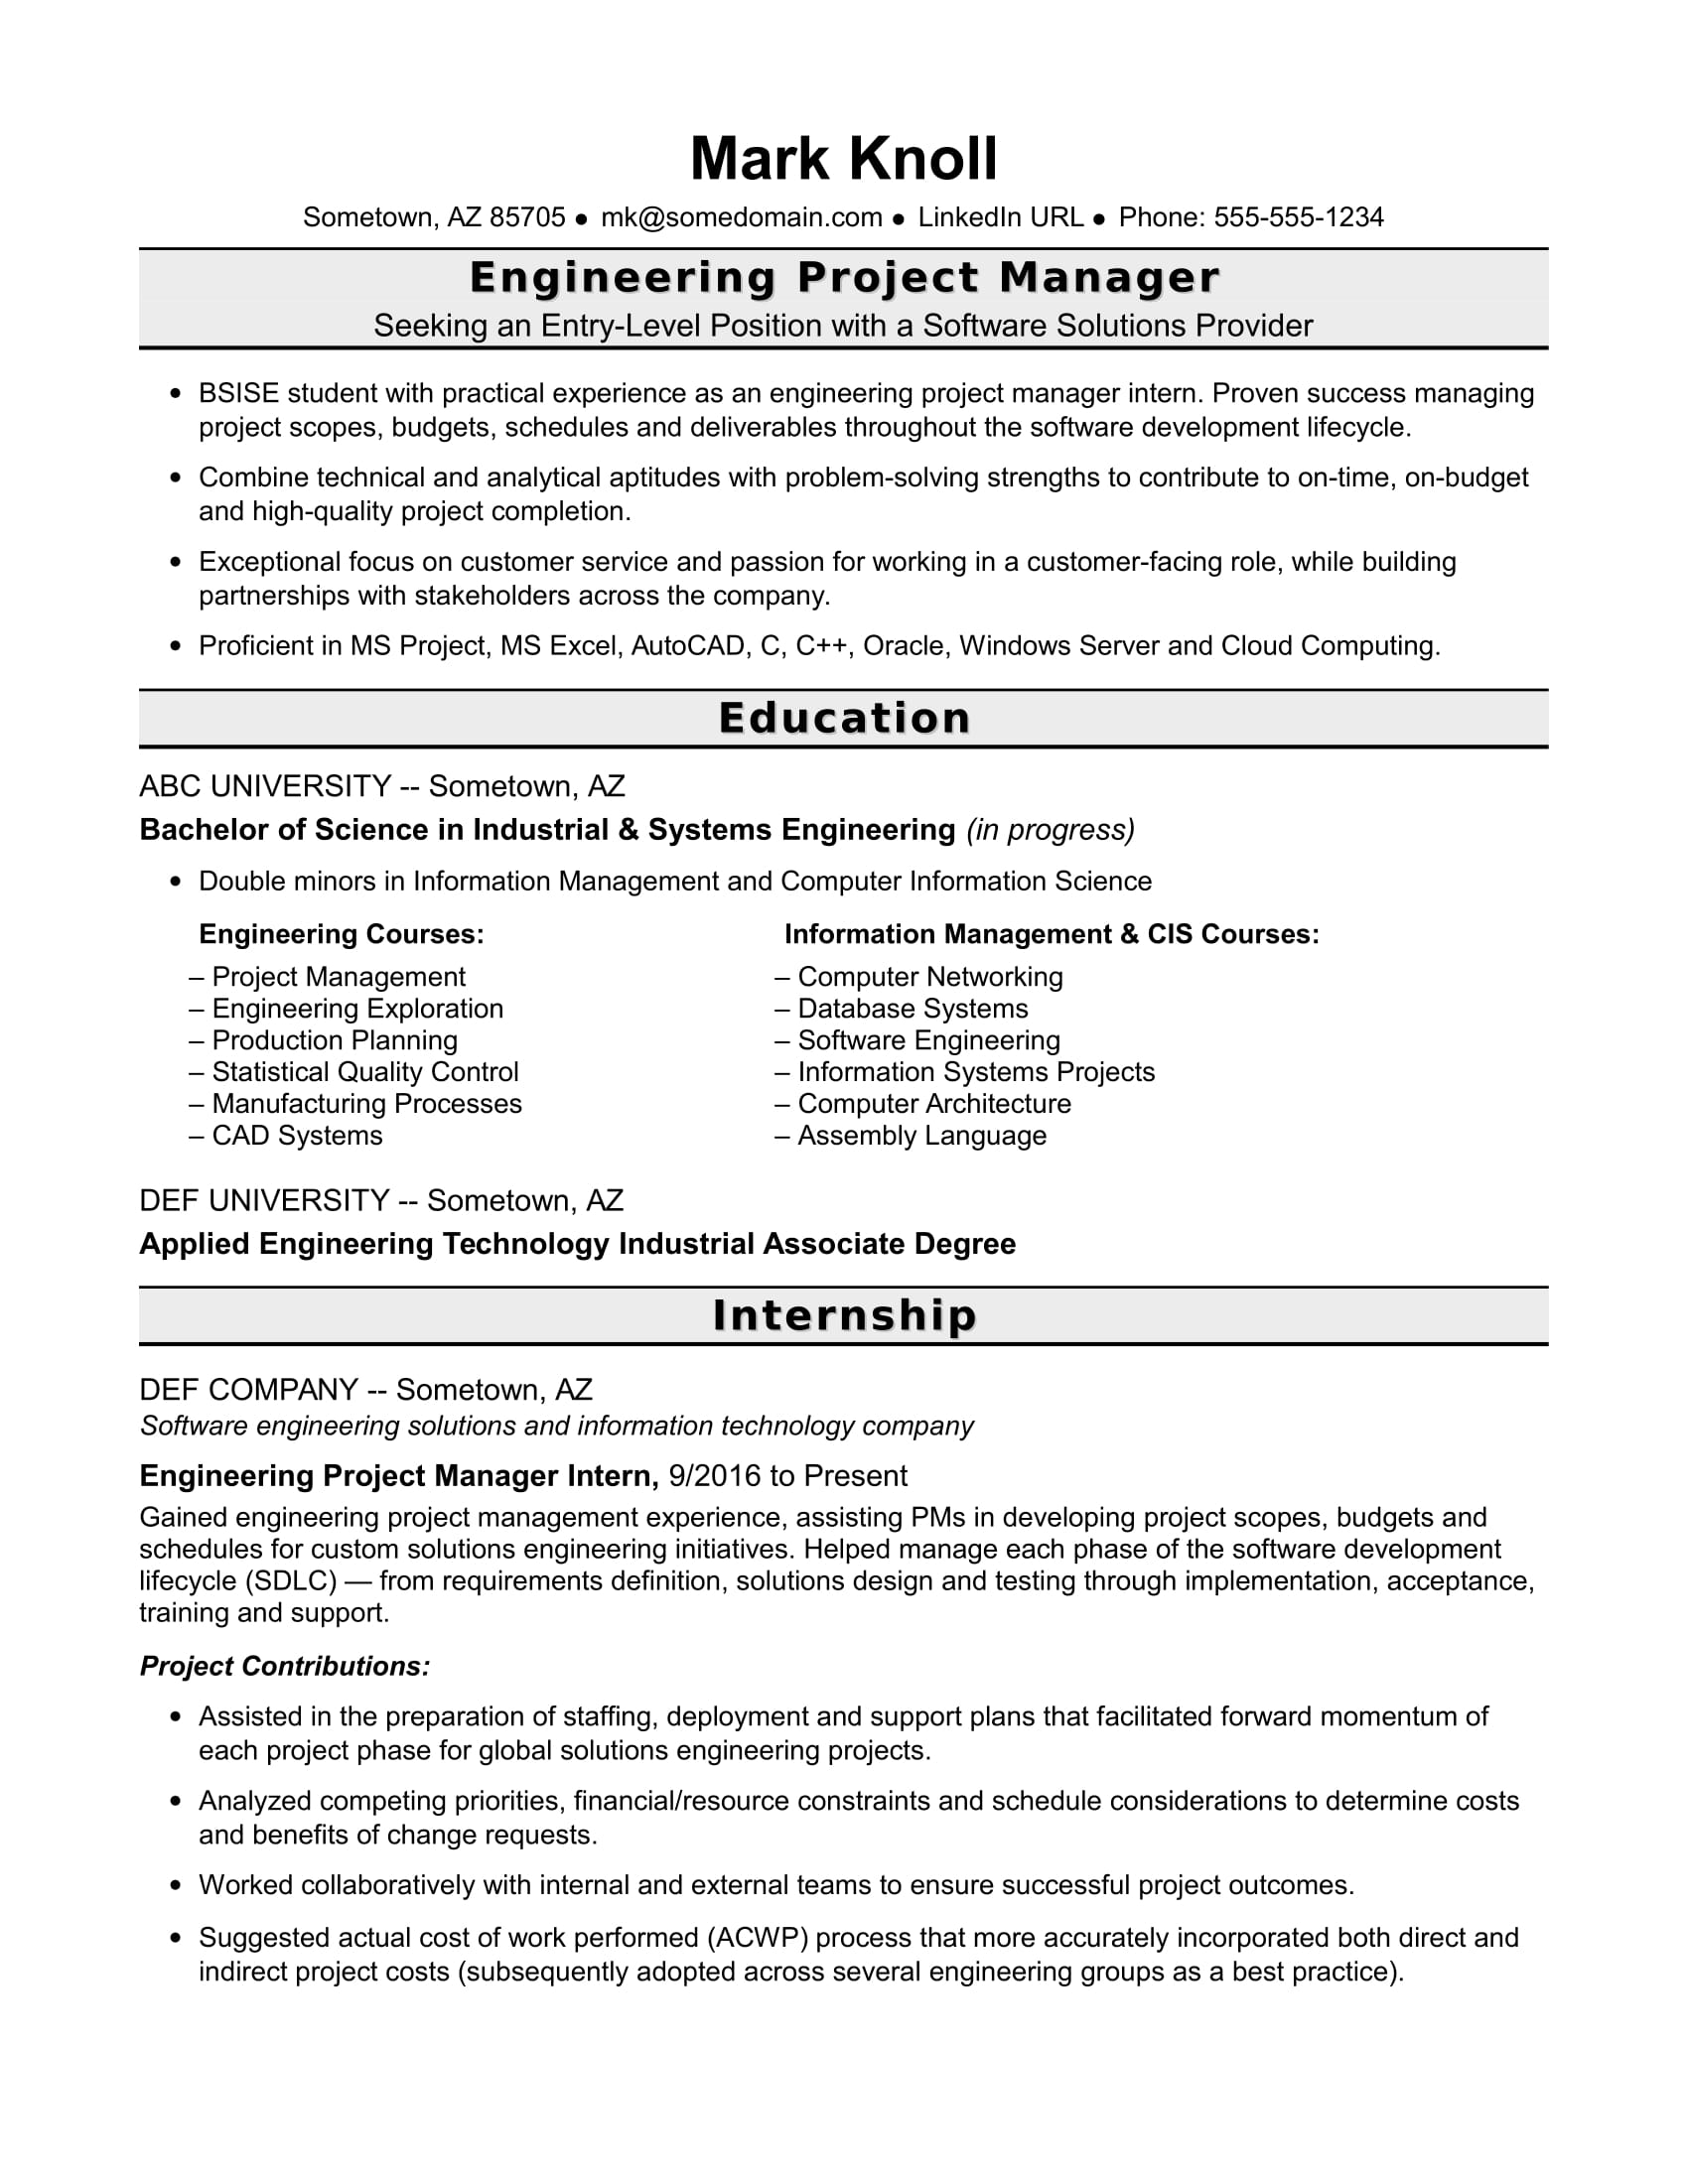 Entry-Level Project Manager Resume For Engineers  Monster.com